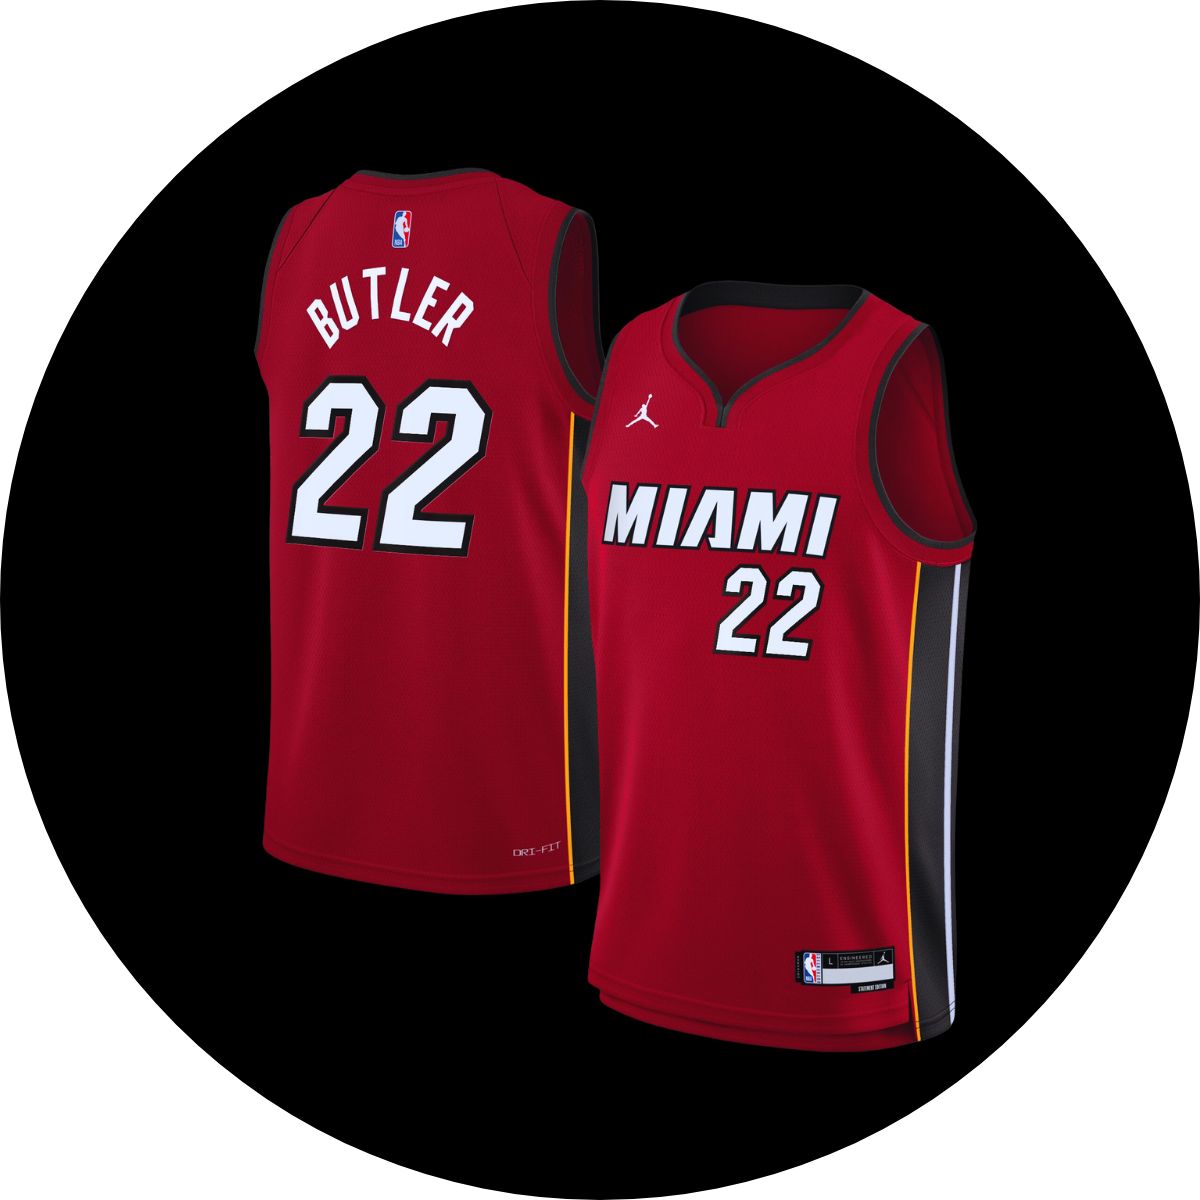 Miami Heat Jerseys An In-Depth Look at Style, Durability, and More